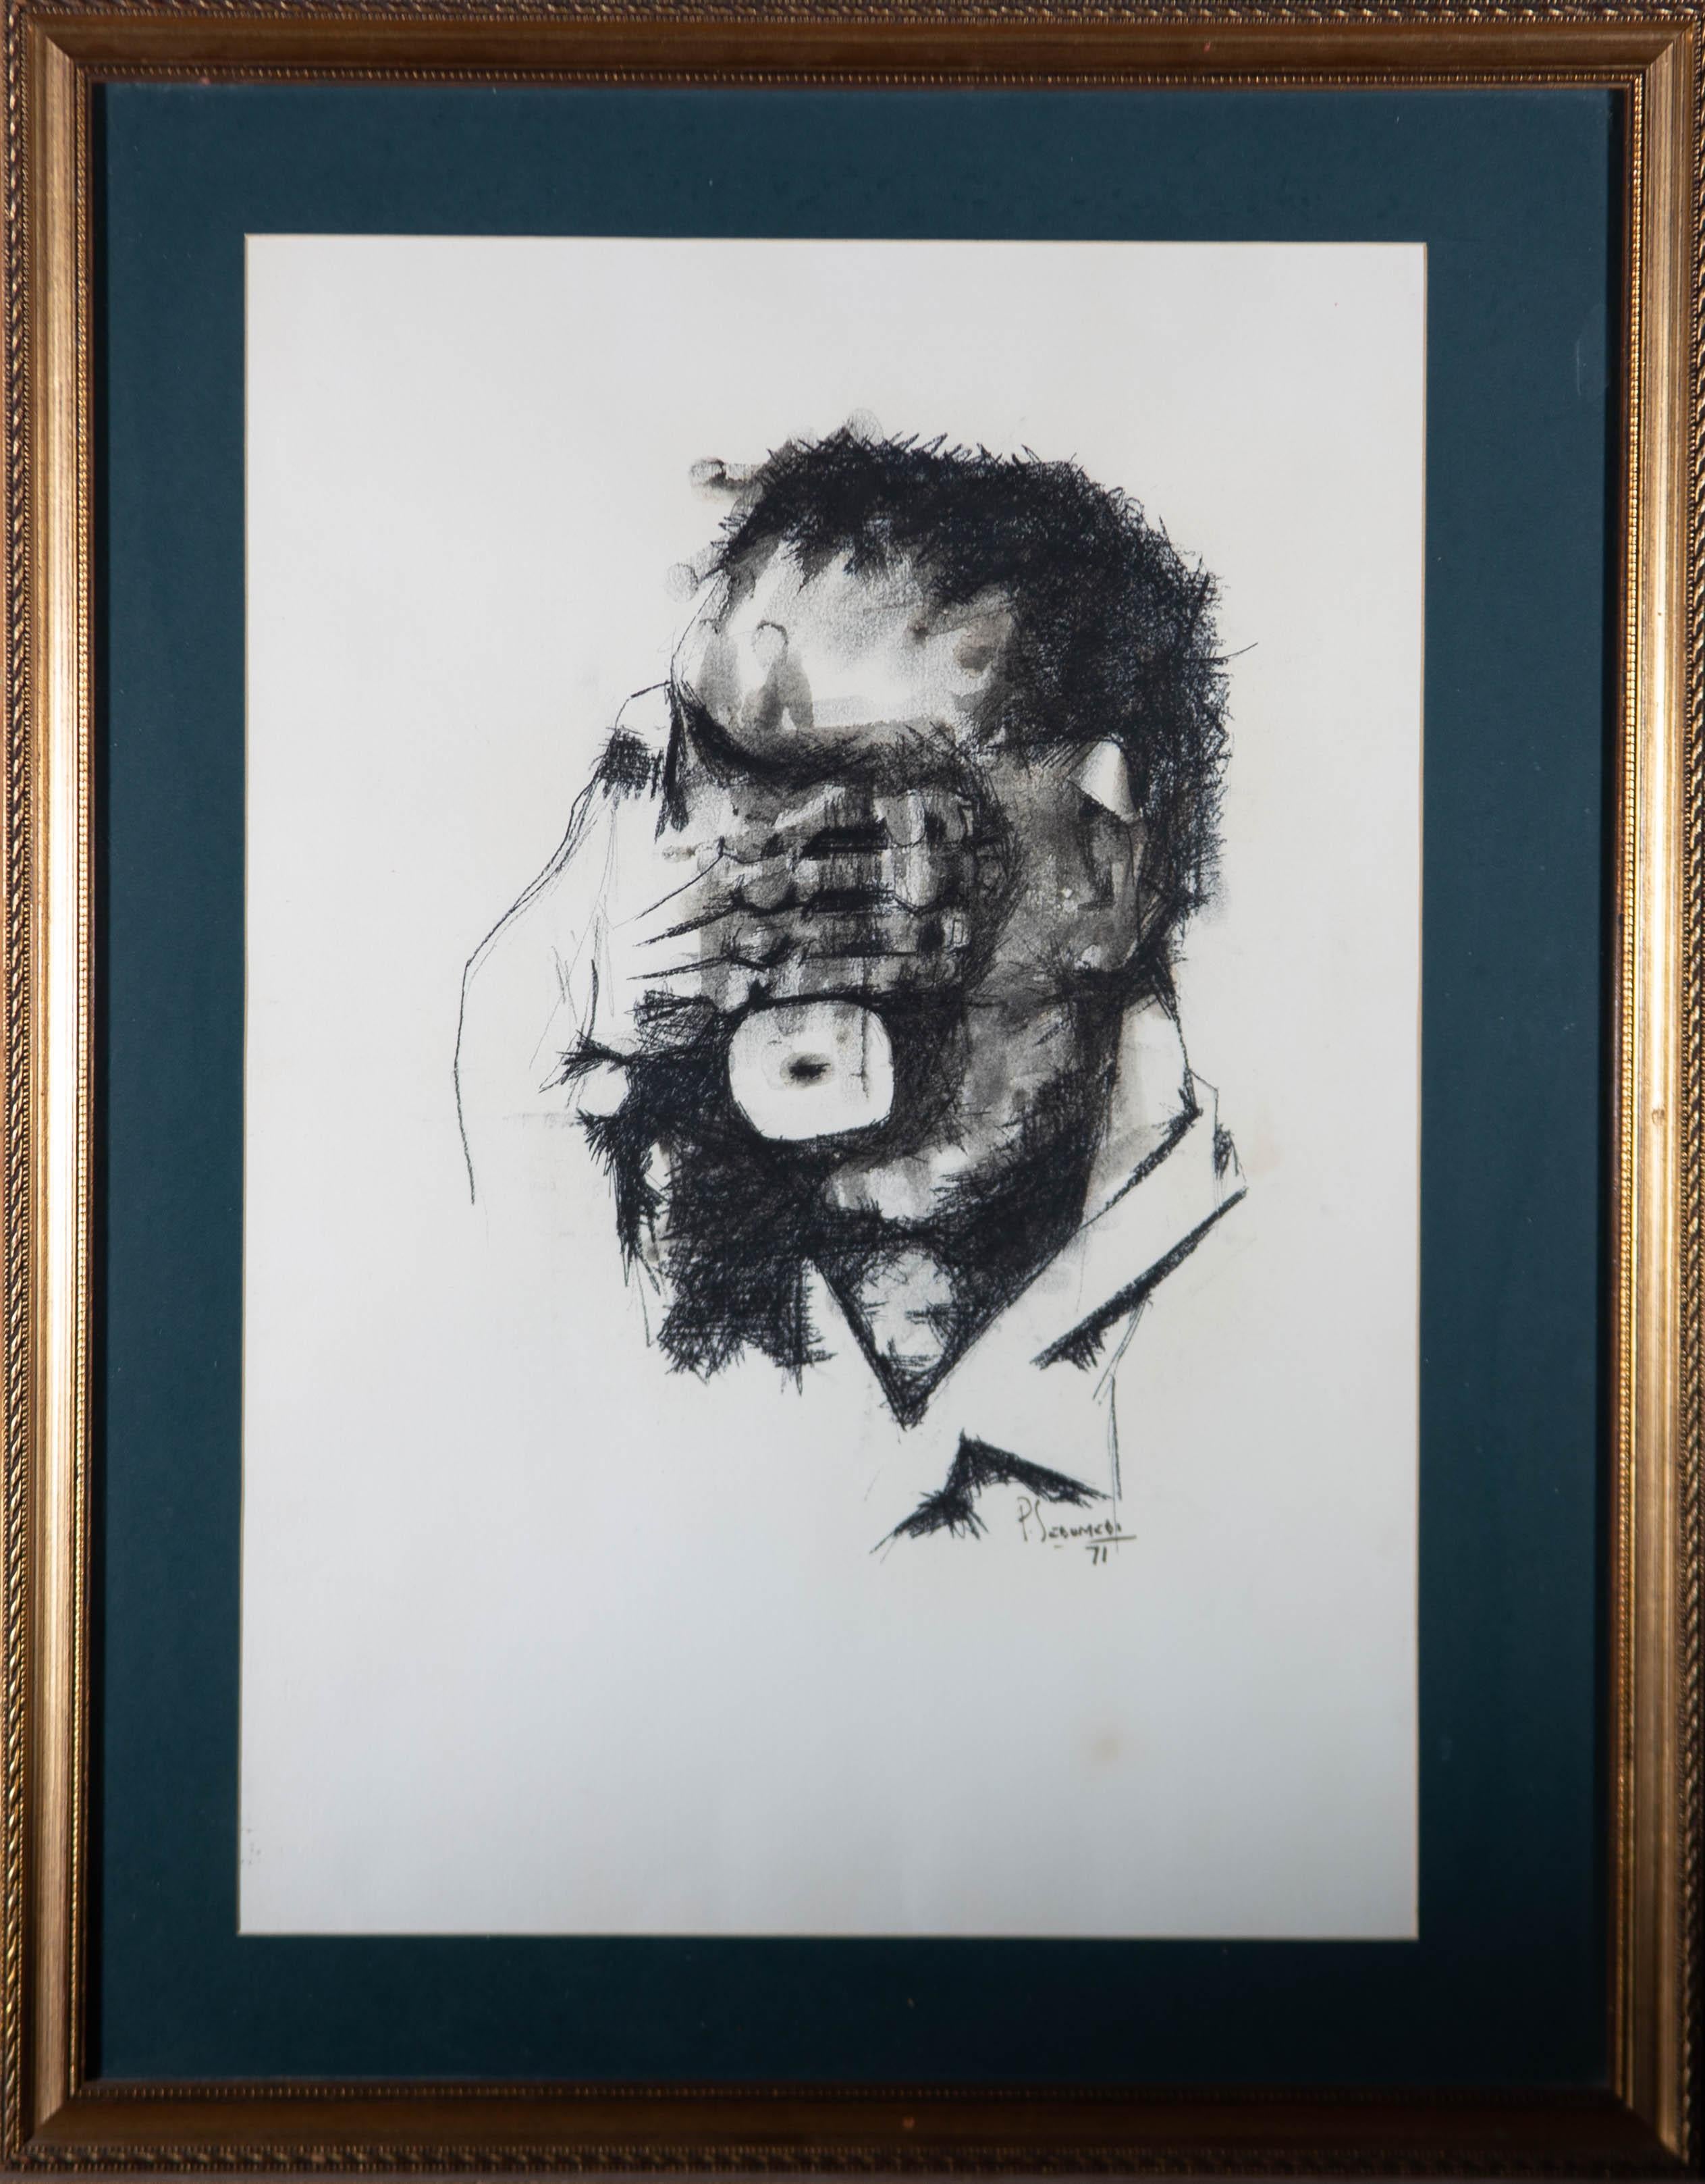 Unknown Portrait - P. Sedumedi - 1971 Charcoal Drawing, Covering the Face